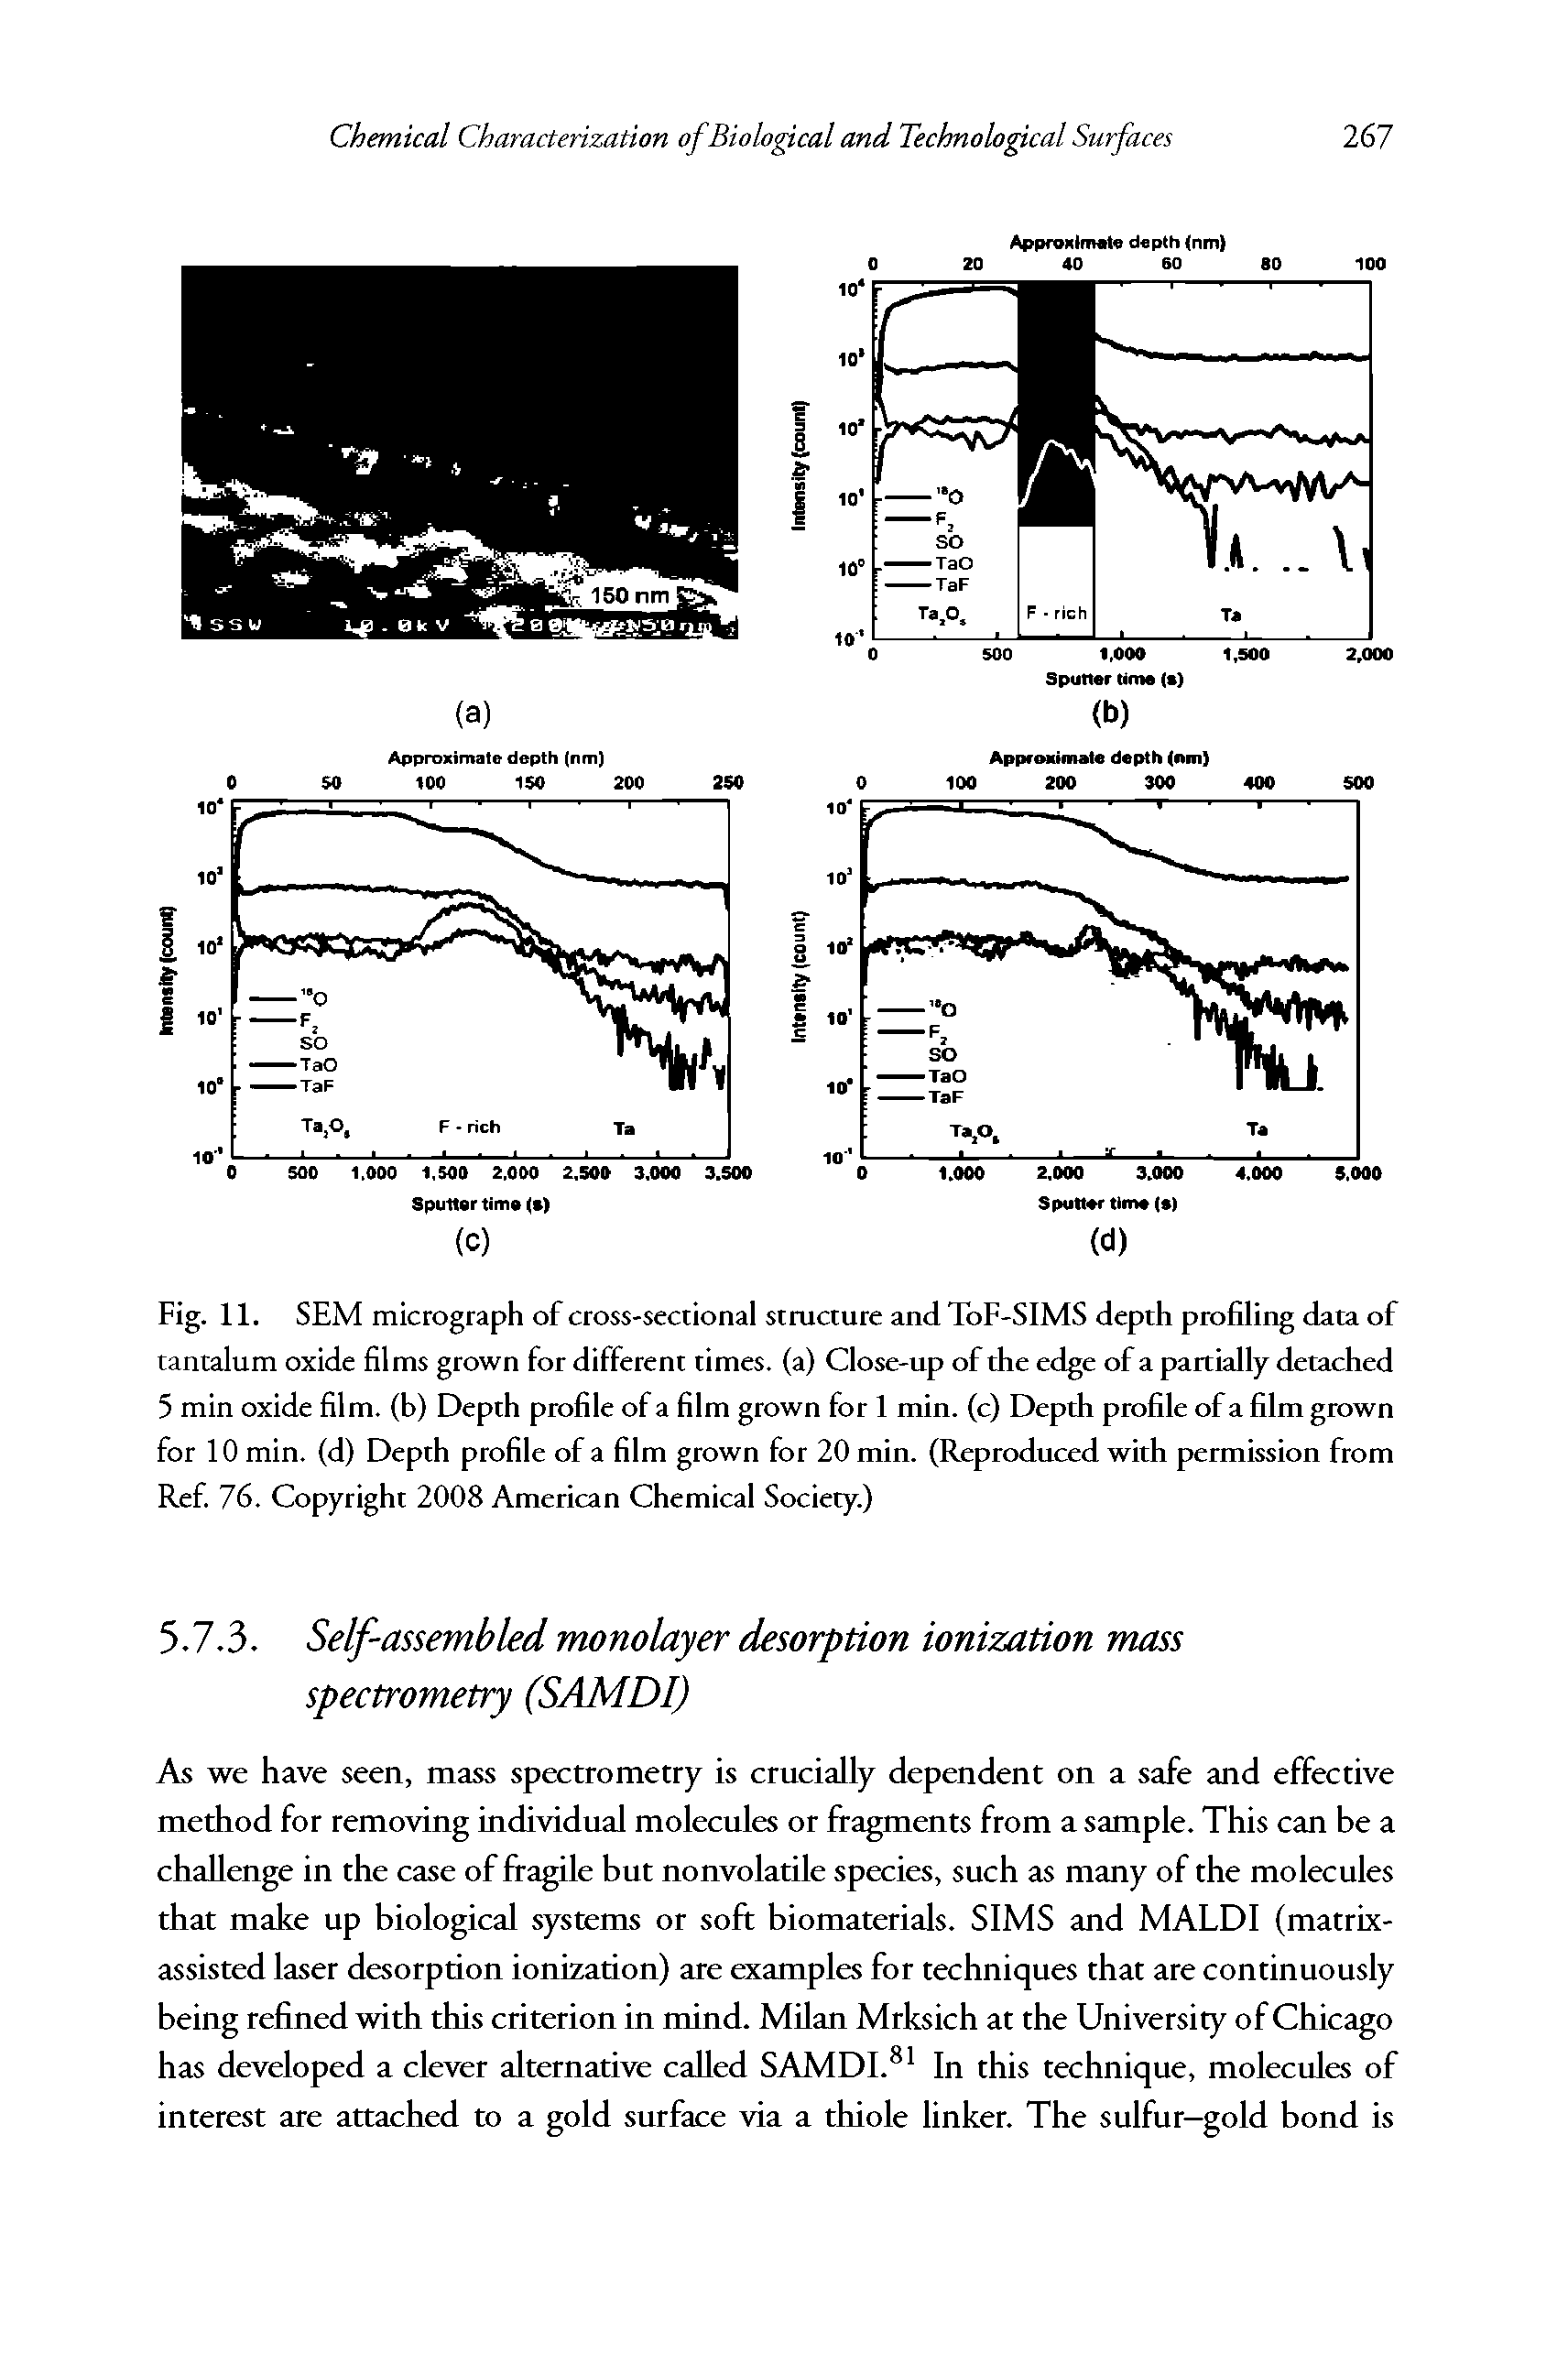 Fig. 11. SEM micrograph of cross-sectional structure and TbF-SIMS depth profiling data of tantalum oxide films grown for different times, (a) Close-up of the edge of a partially detached 5 min oxide film, (b) Depth profile of a film grown for 1 min. (c) Depth profile of a film grown for 10 min. (d) Depth profile of a film grown for 20 min. (Reproduced with permission from Ref. 76. Copyright 2008 American Chemical Society.)...